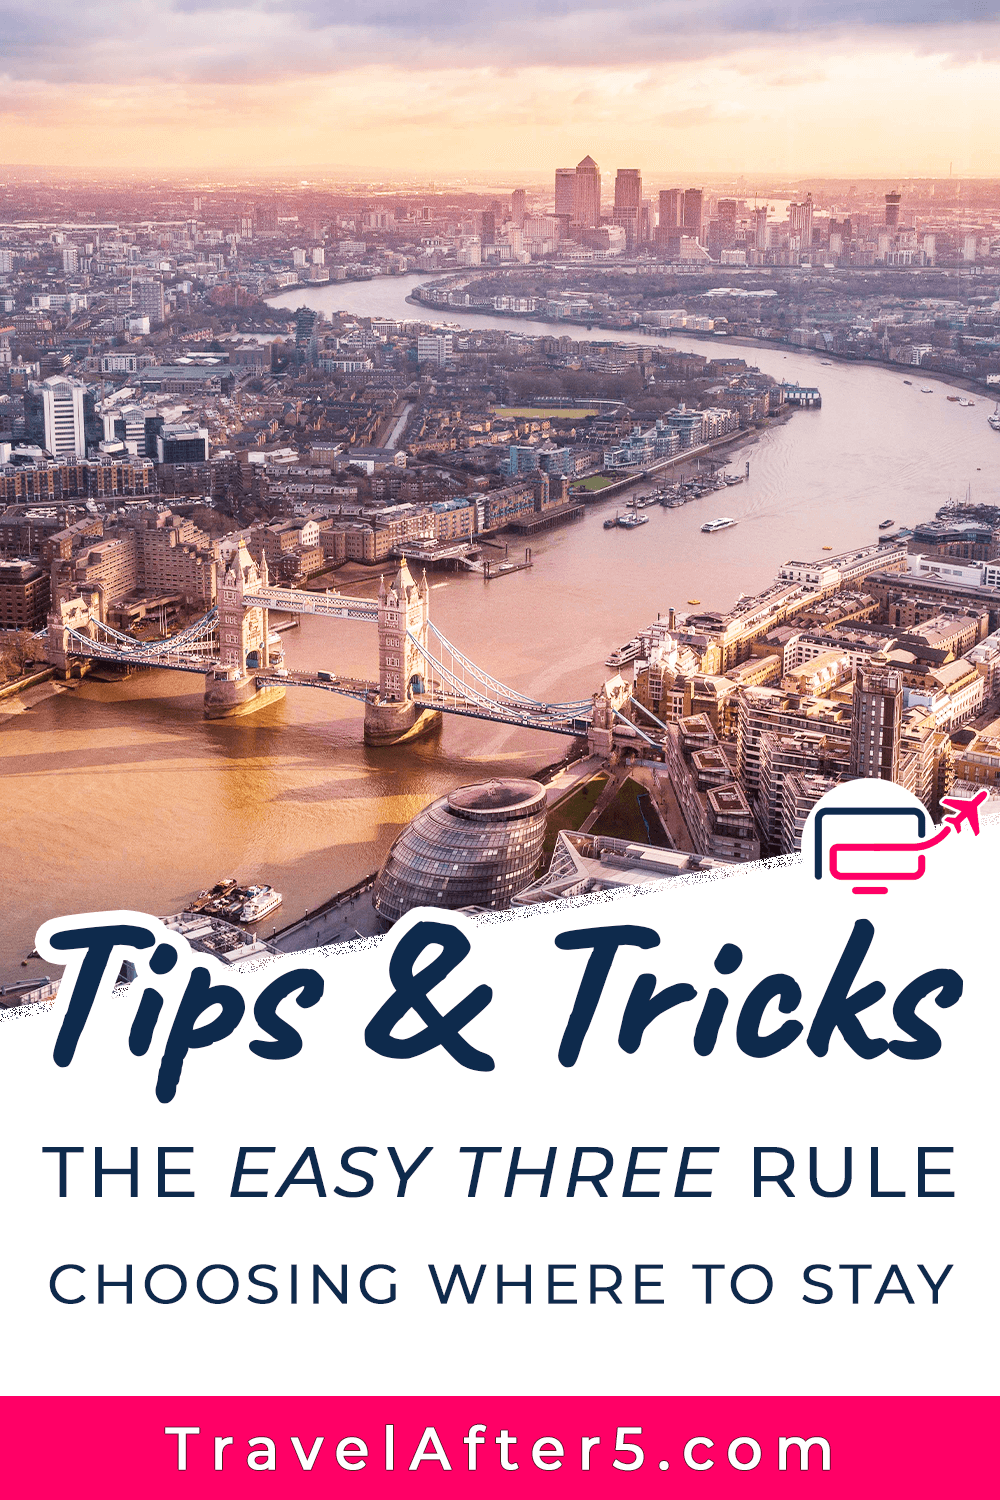 Pinterest Pin to Tips & Tricks: The Easy Three Rule for Choosing Where to Stay, by Travel After 5